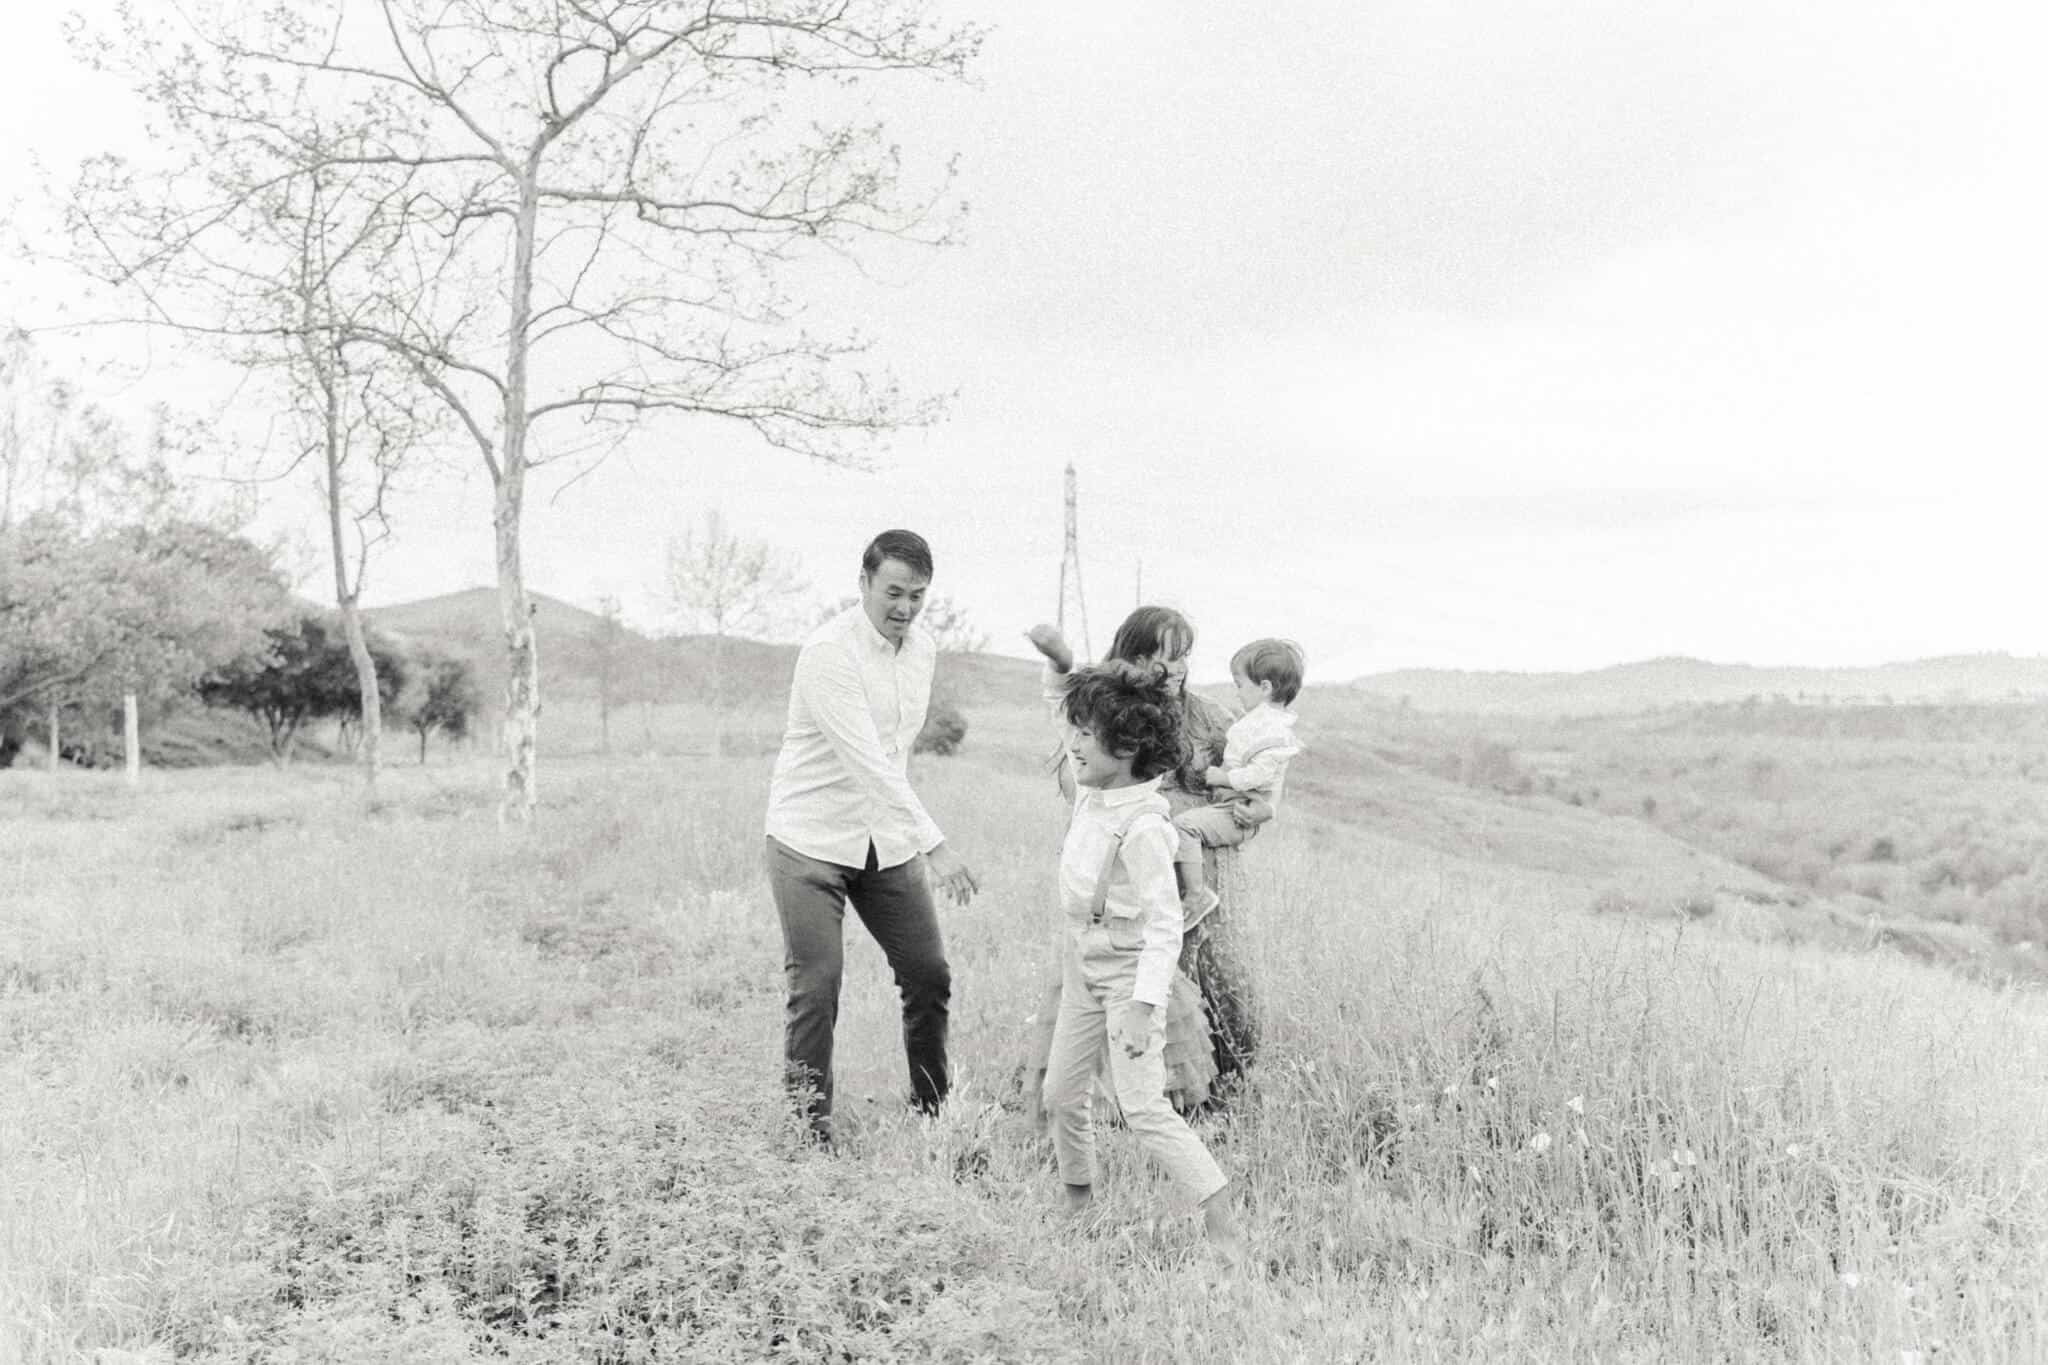 Black and white image of family dancing in an open field